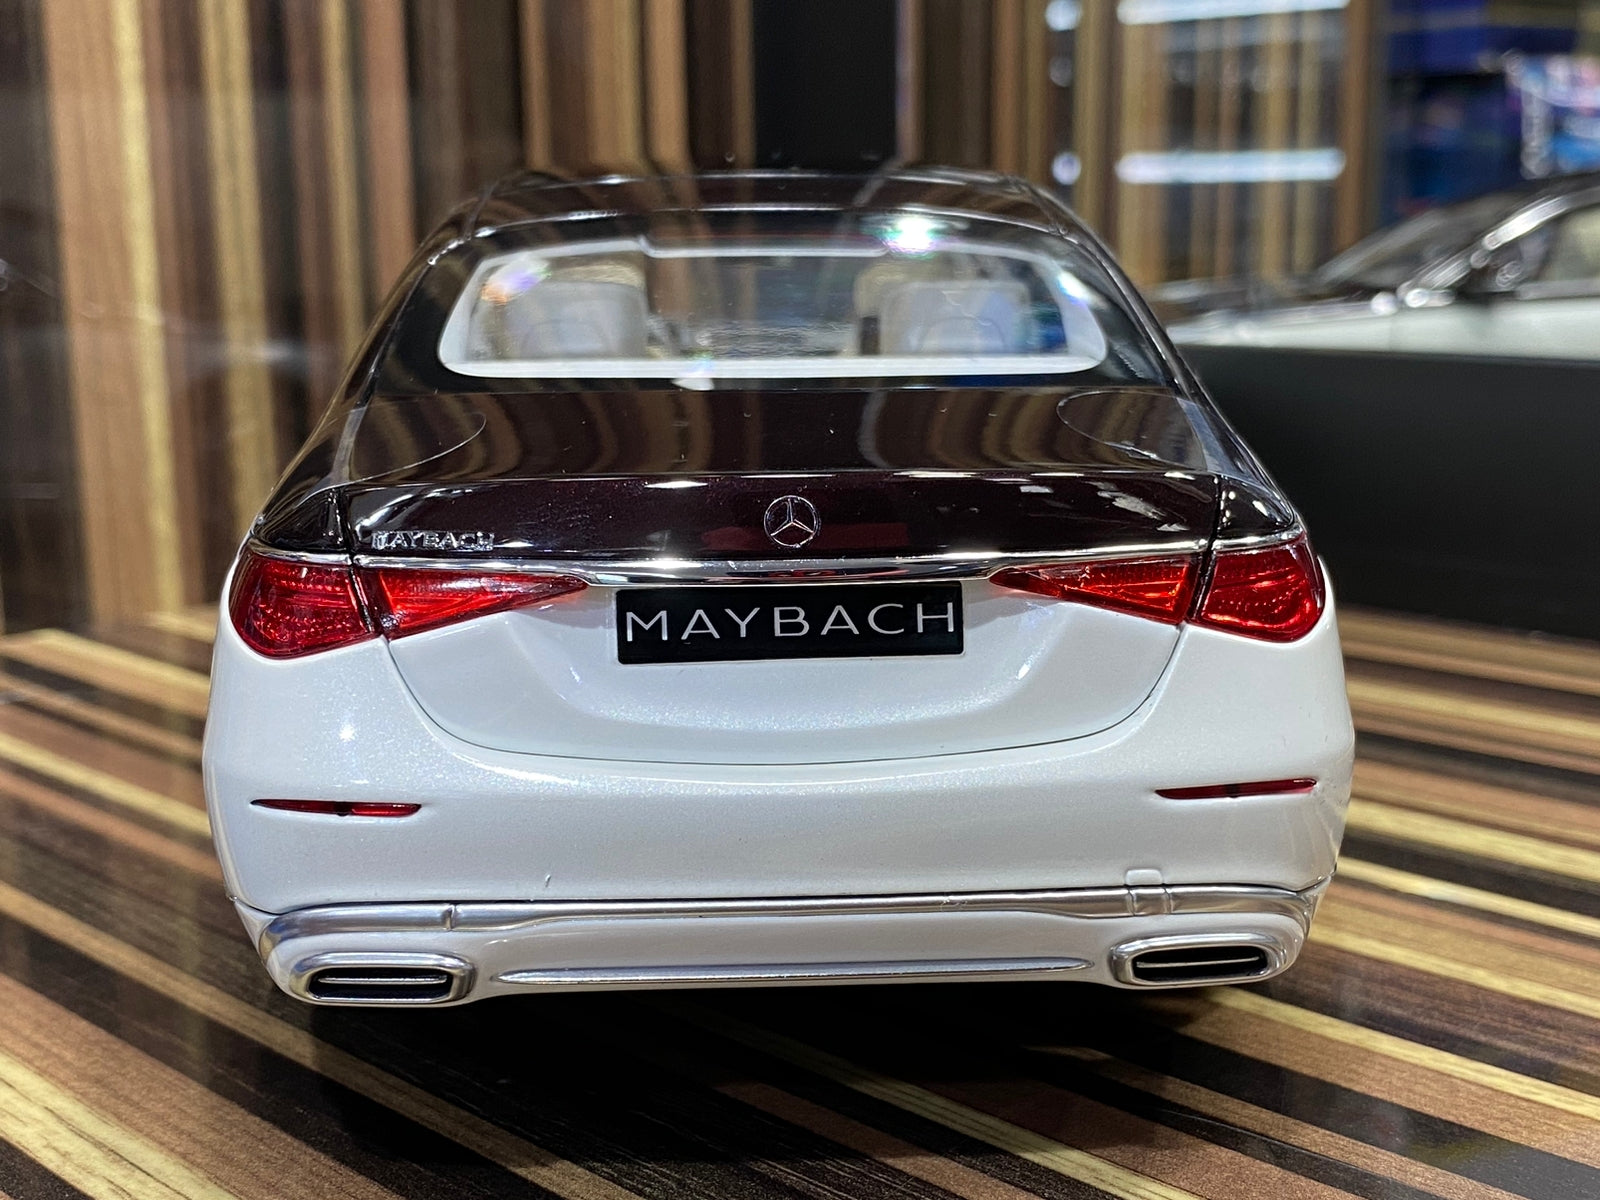 1/18 Diecast Mercedes-Maybach S-Class 2021 White & Brown Norev Scale Model Car